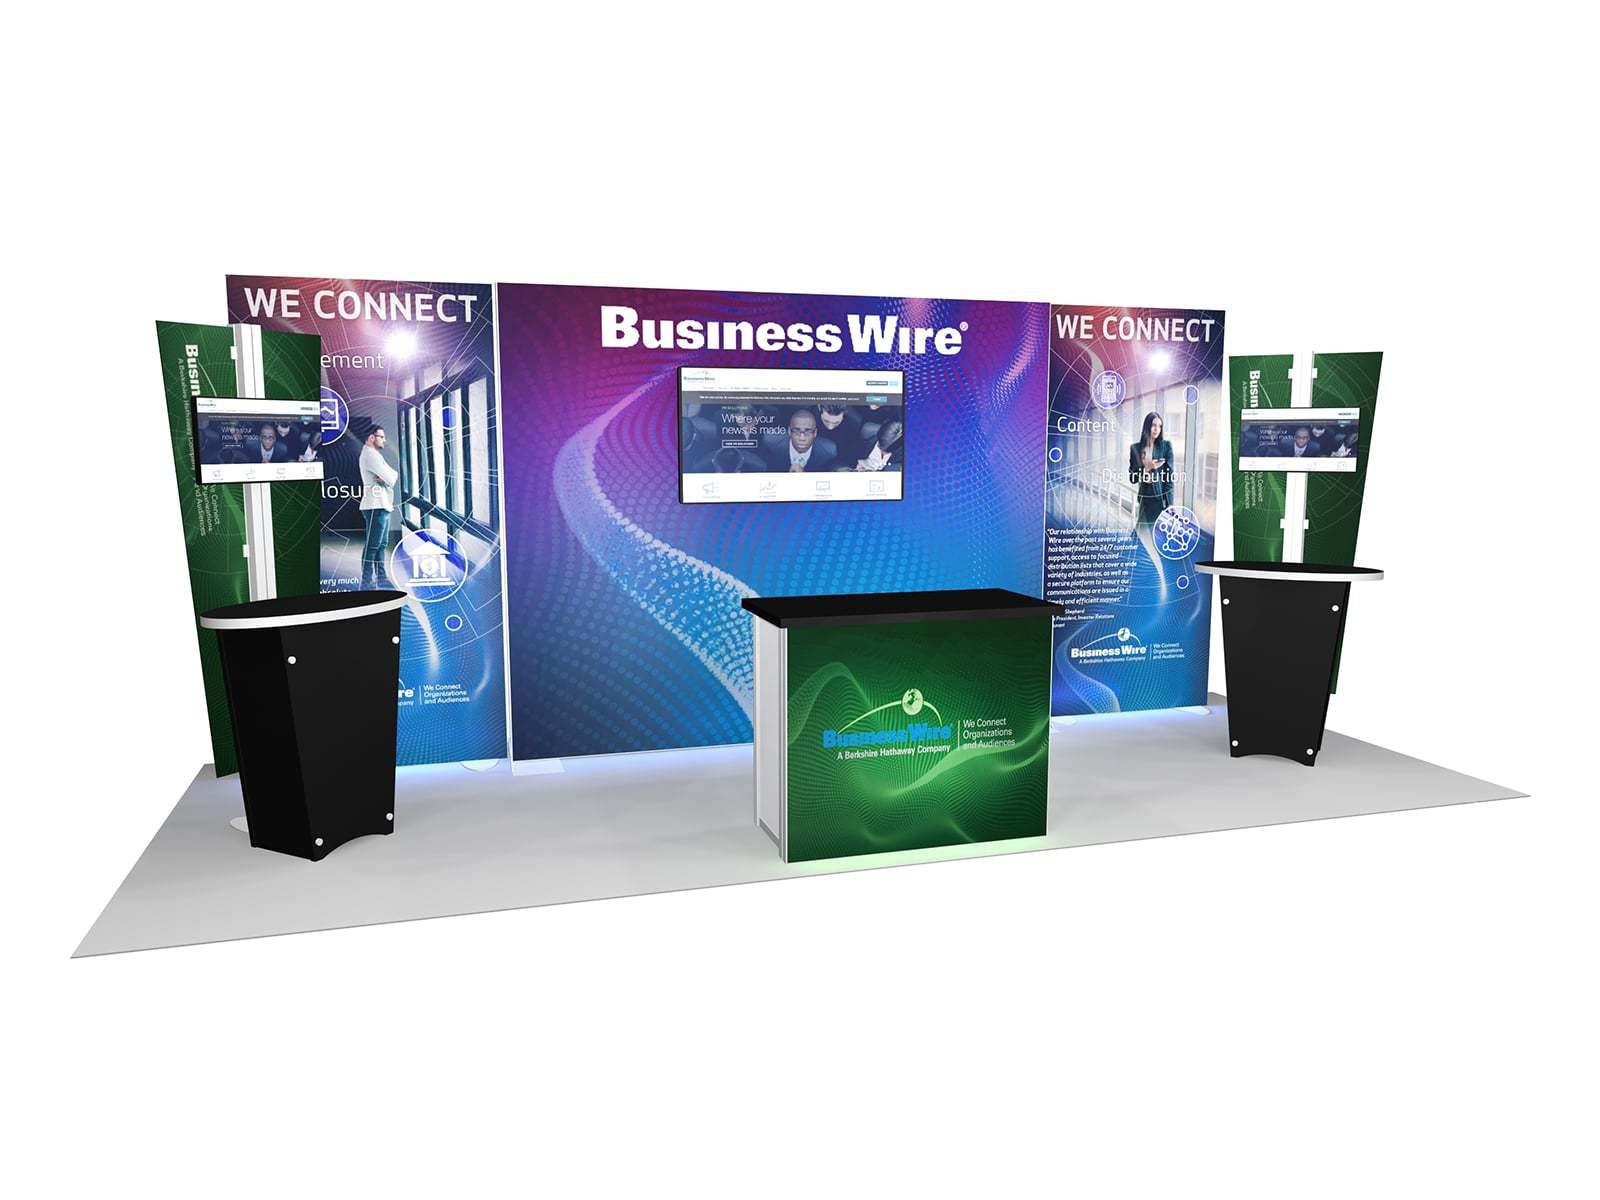 Ready to rent a trade show booth? We have a wide selection of trade show booth rental options